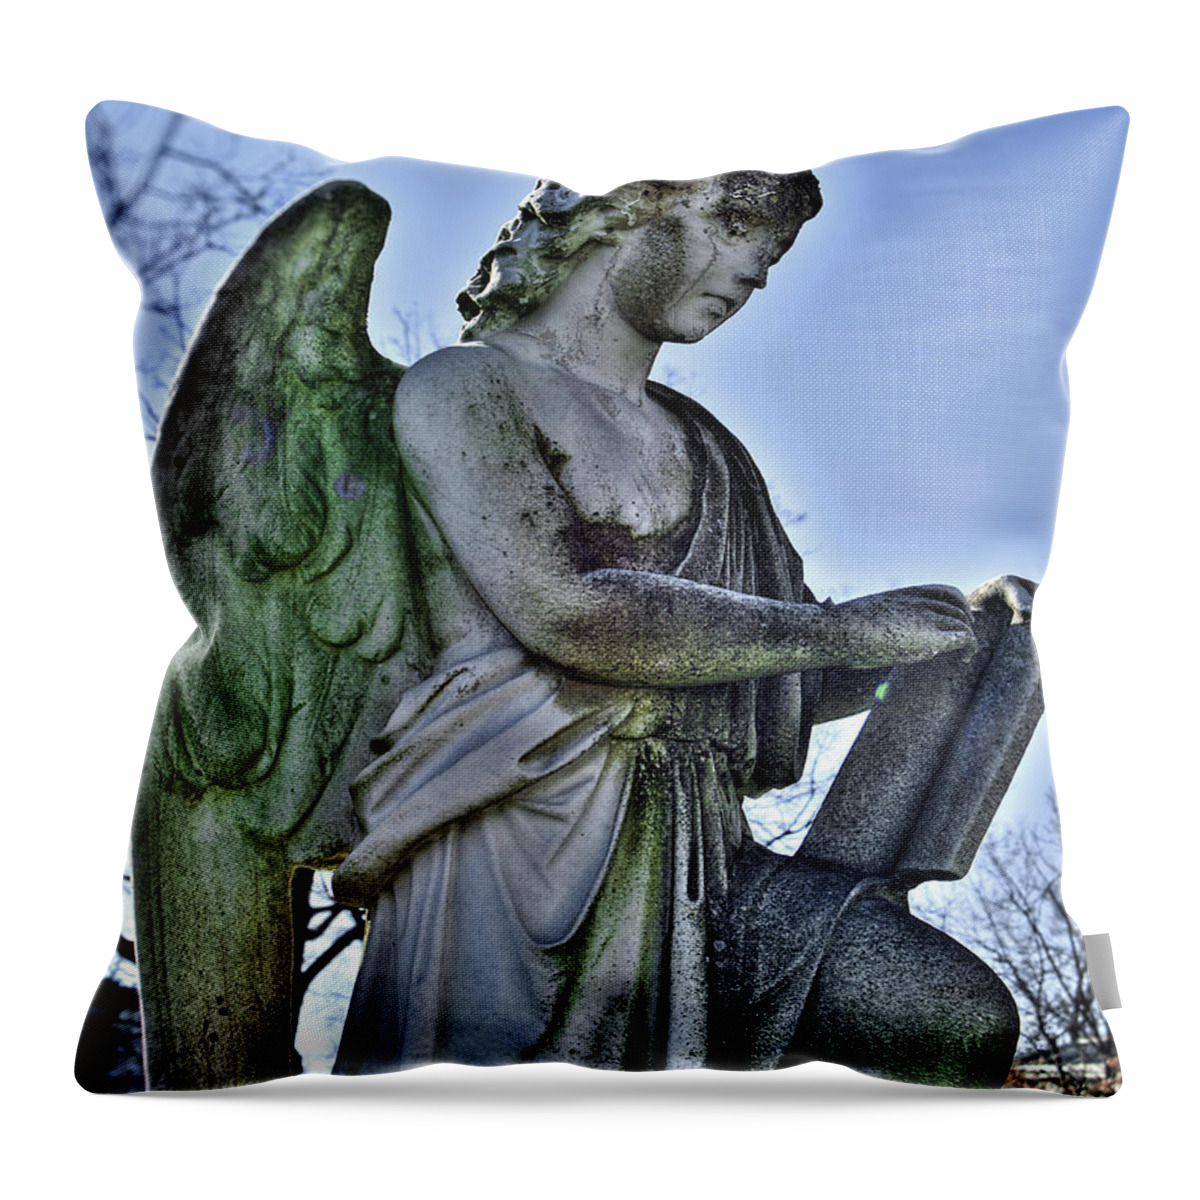 Gothic Throw Pillow featuring the photograph Prophecy by Tammy Wetzel